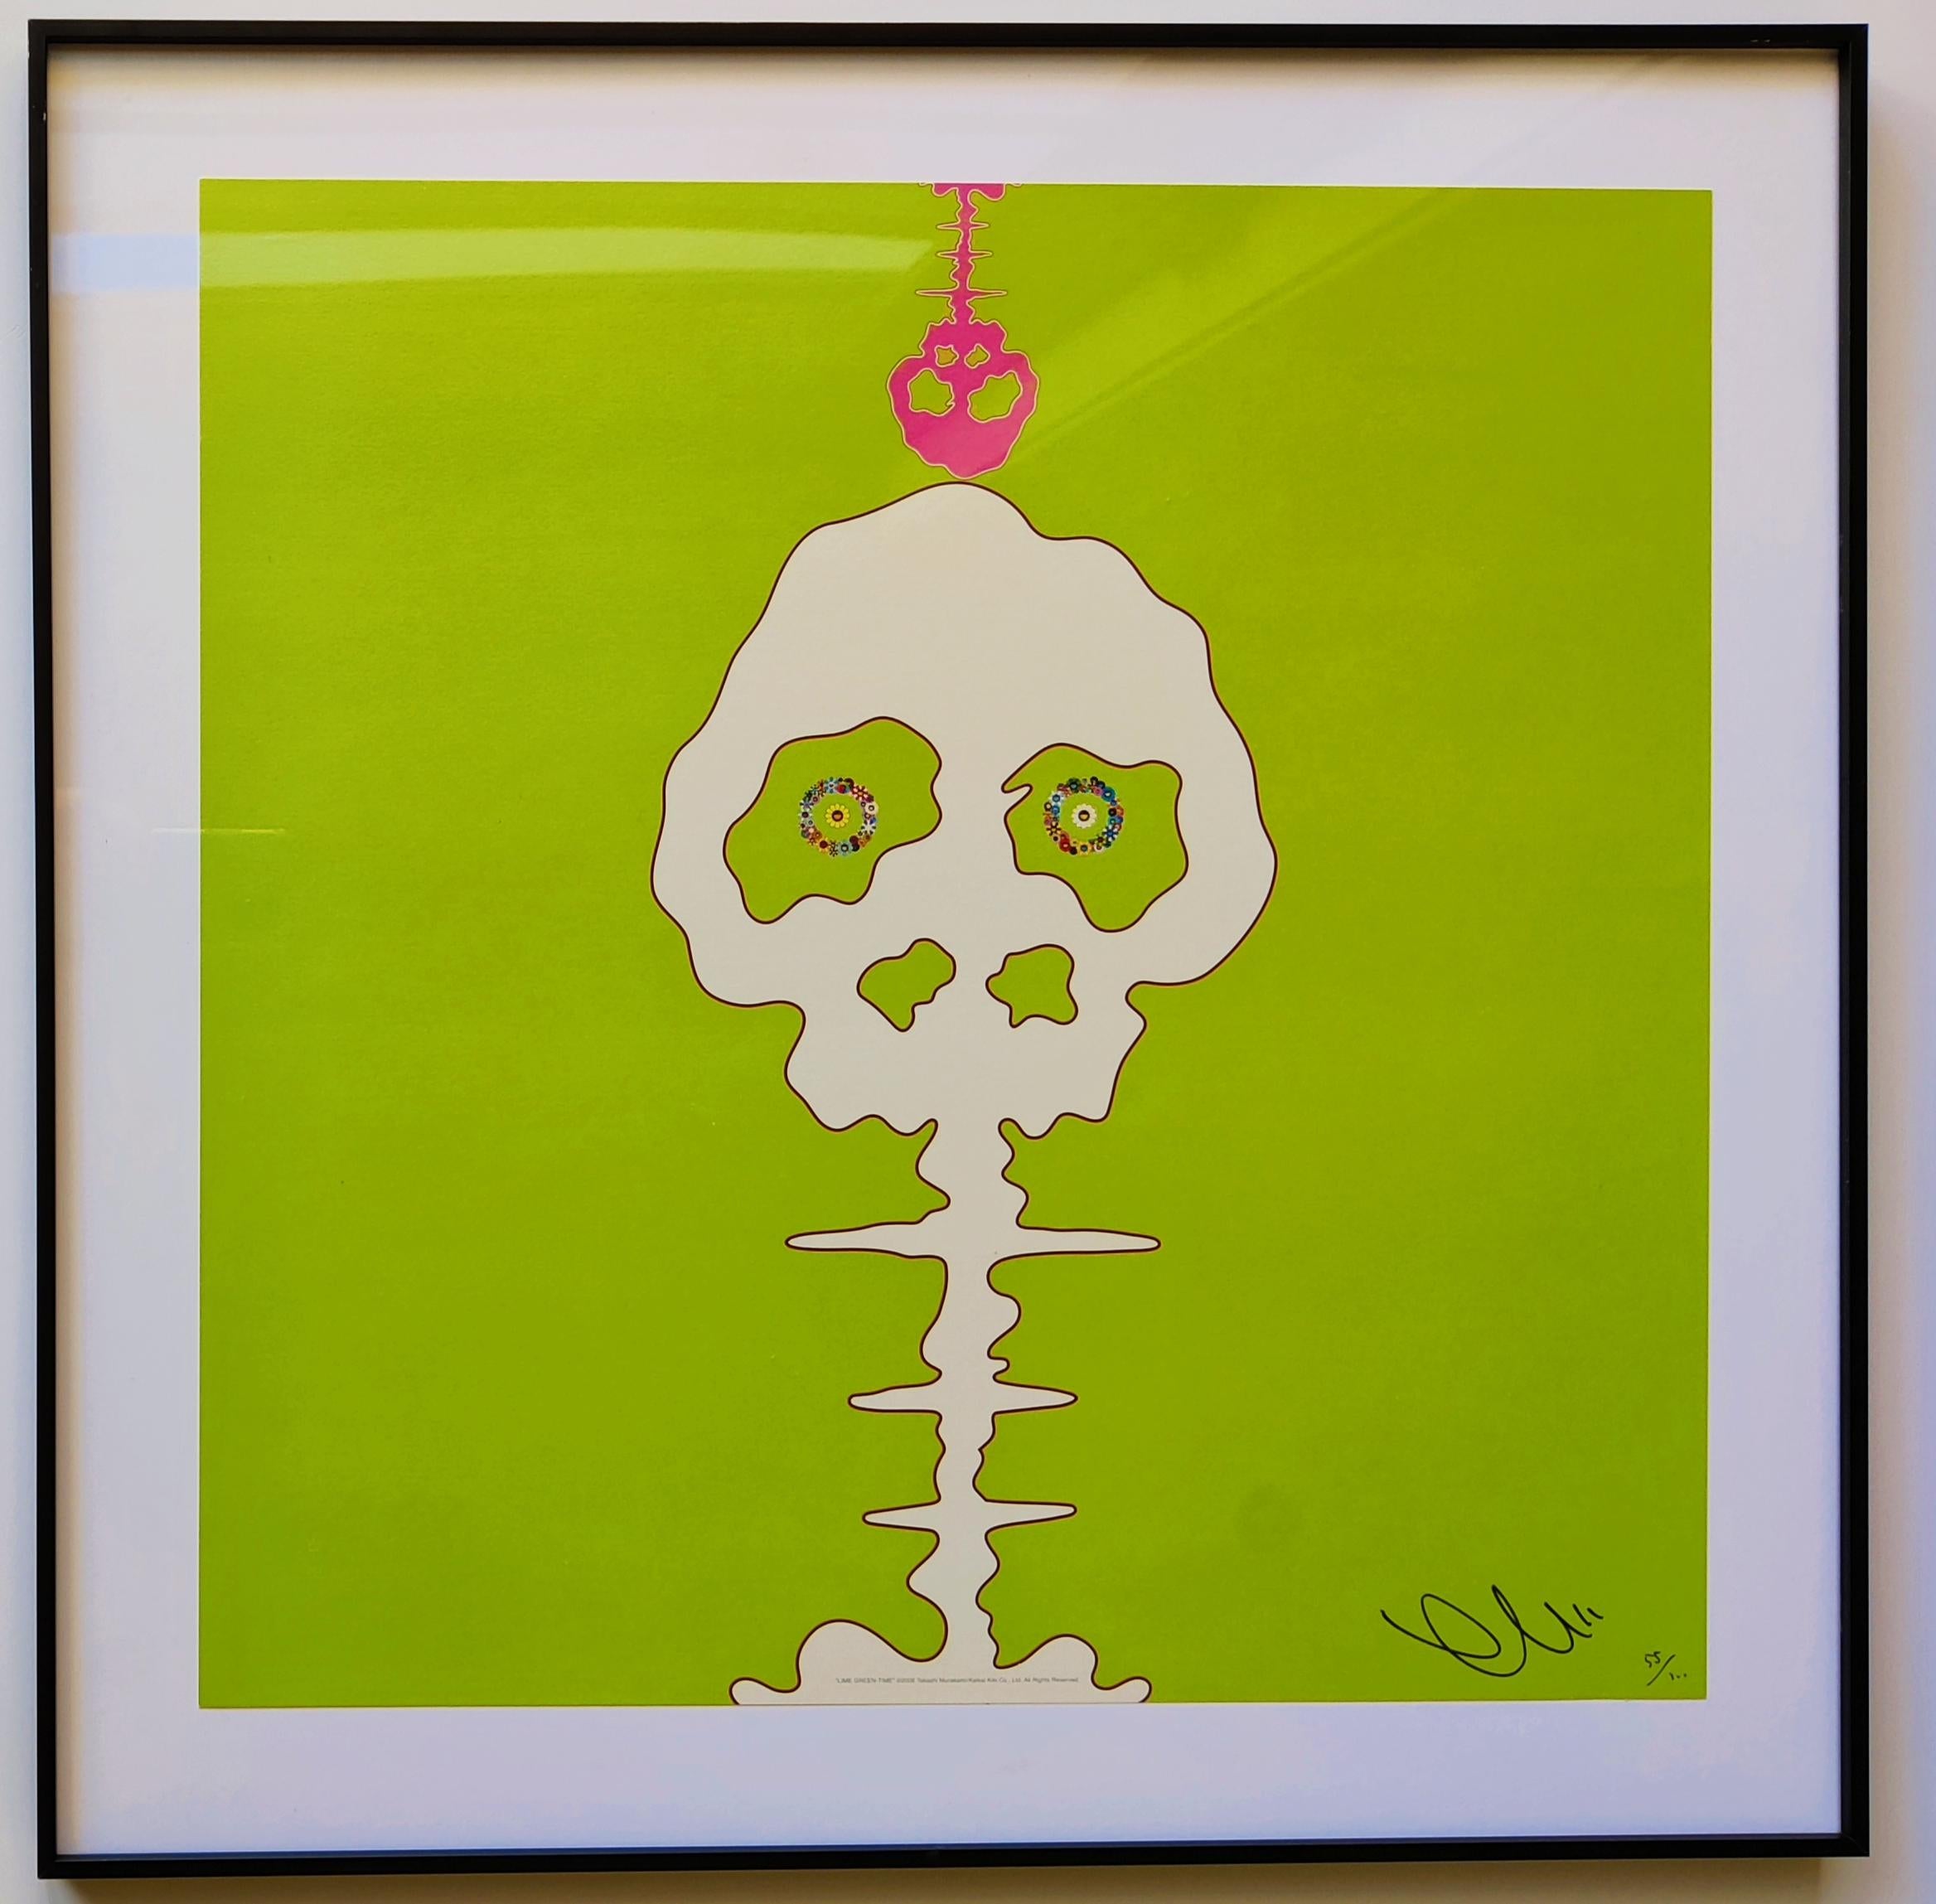 Takashi Murakami
Time Bokan- Green, 2006
Offset lithograph
Edition: 55/300
Image size: 50 x 50 cm
Frame size: 60 x 60 x 2.5 cm
Hand Signed & Numbered by Takashi Murakami
The artwork is in excellent condition
It is framed with the aluminum frame, the